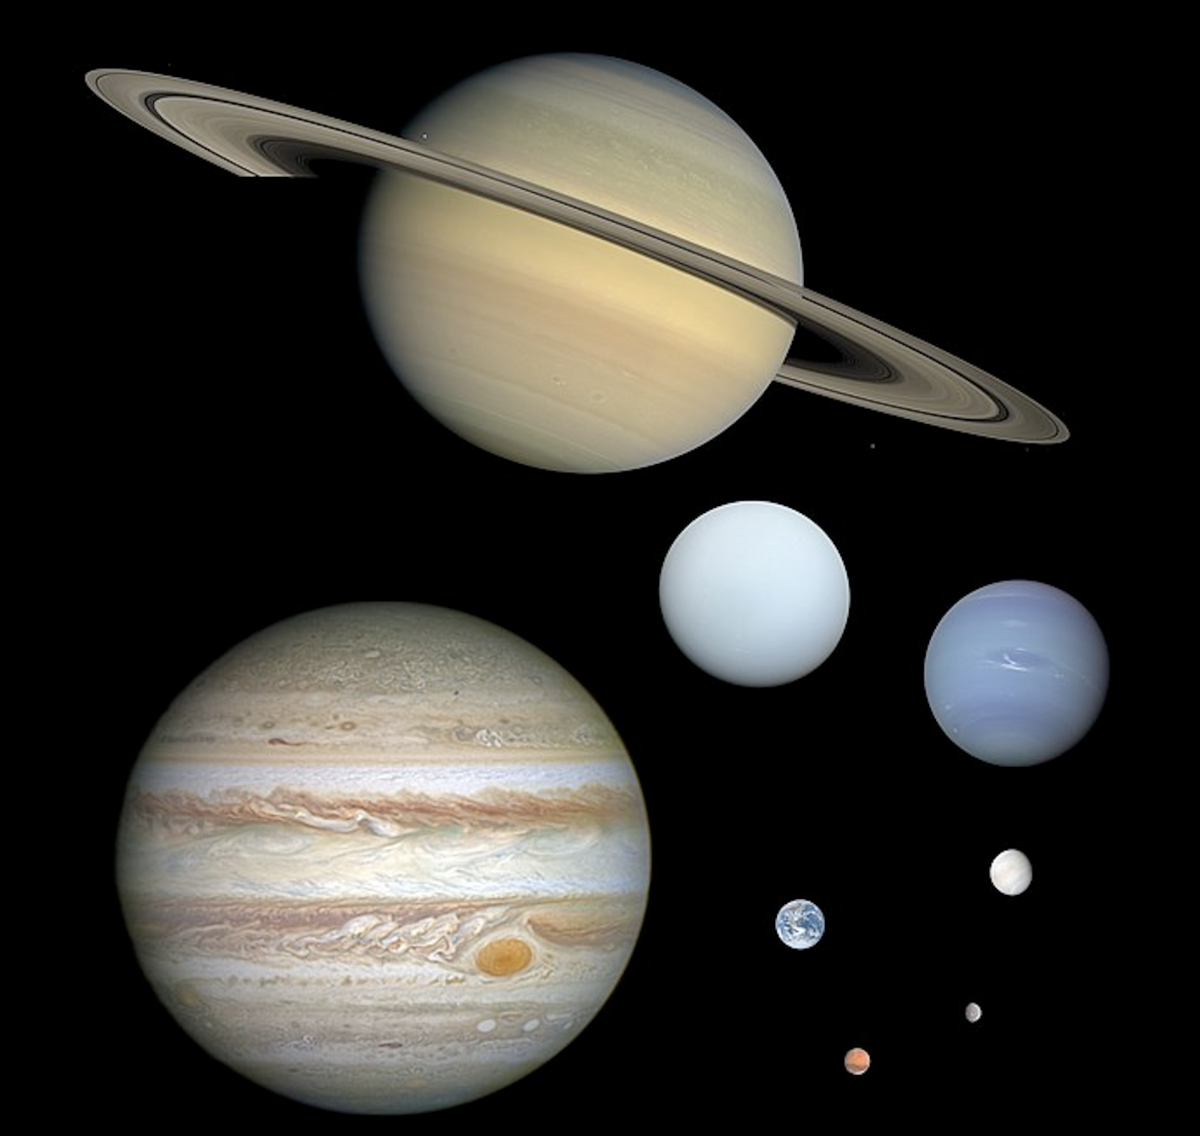 A collection of planets from our solar system on a black background